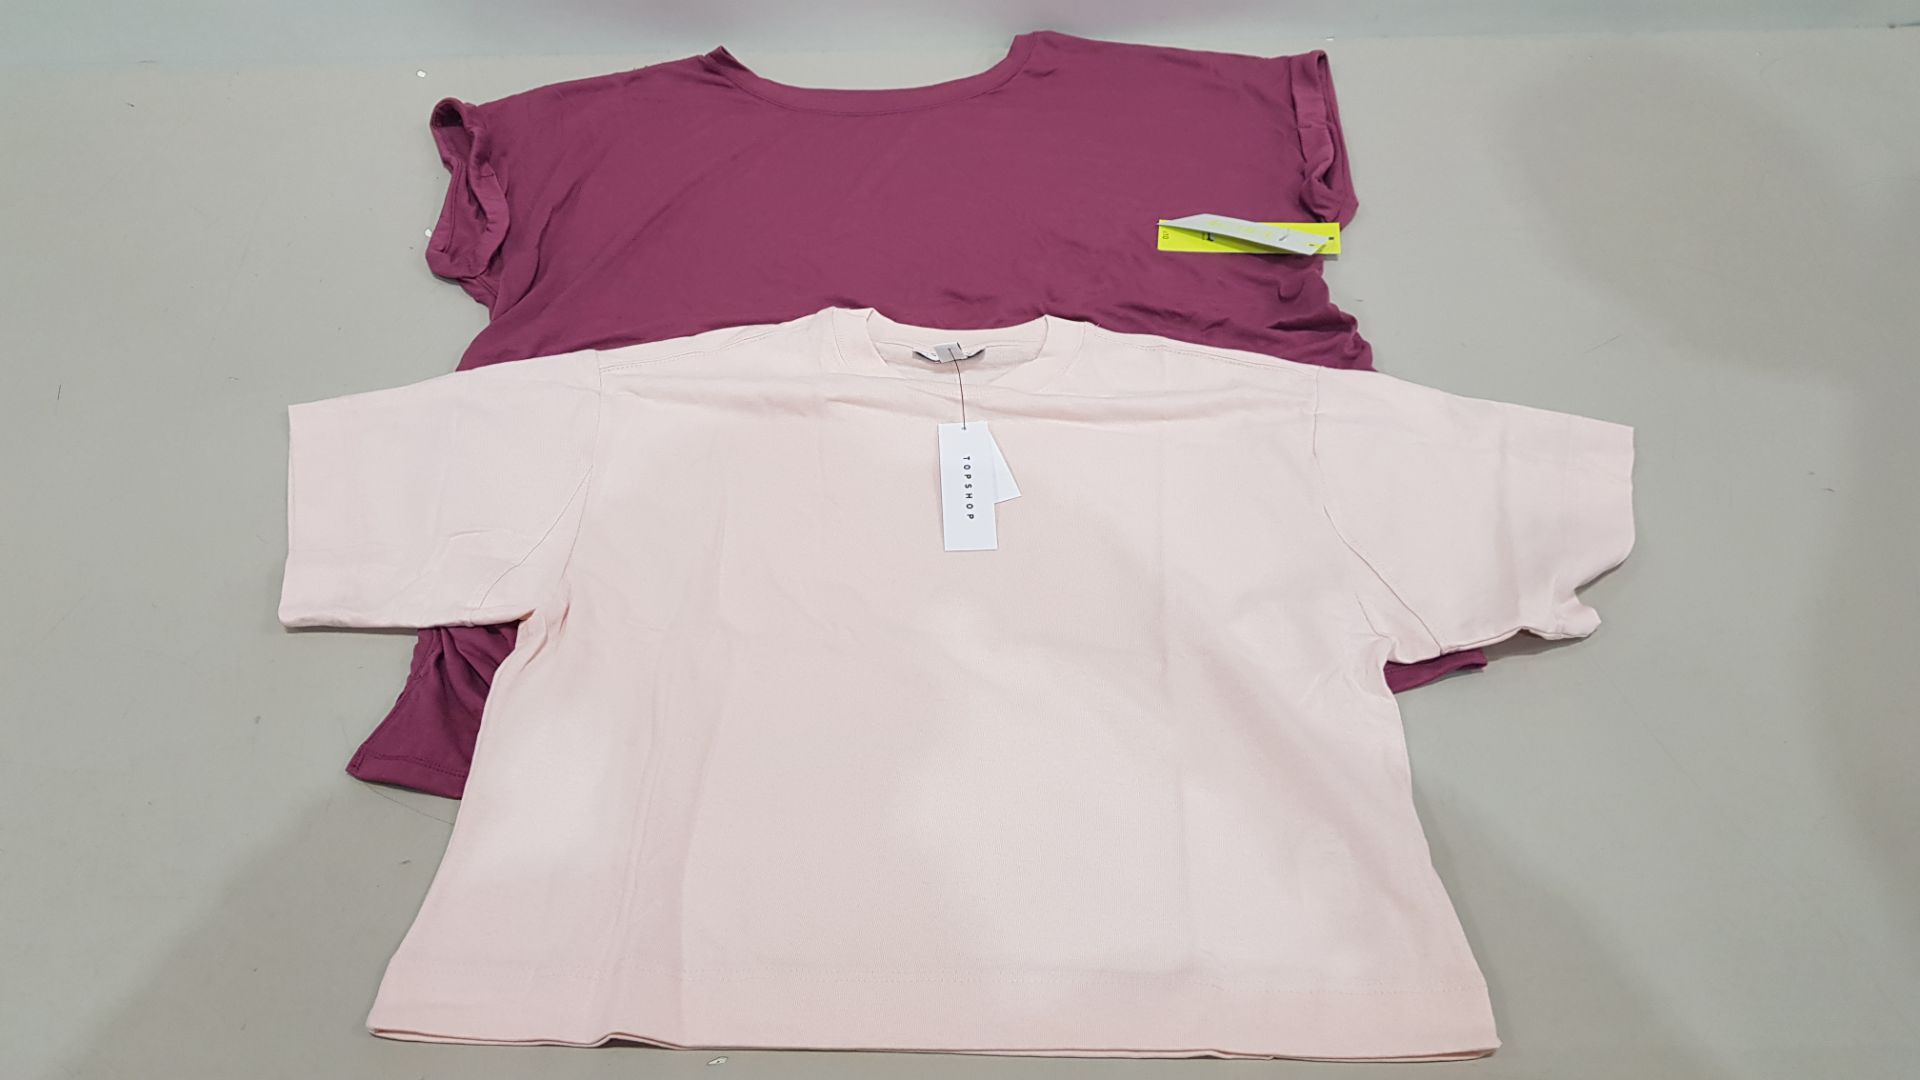 39 PCS OF BRAND NEW WOMENS RETAIL CLOTHING IE. 15 X GEORGE ACTIVE PLUM COLOURED T-SHIRTS (SIZE XS)